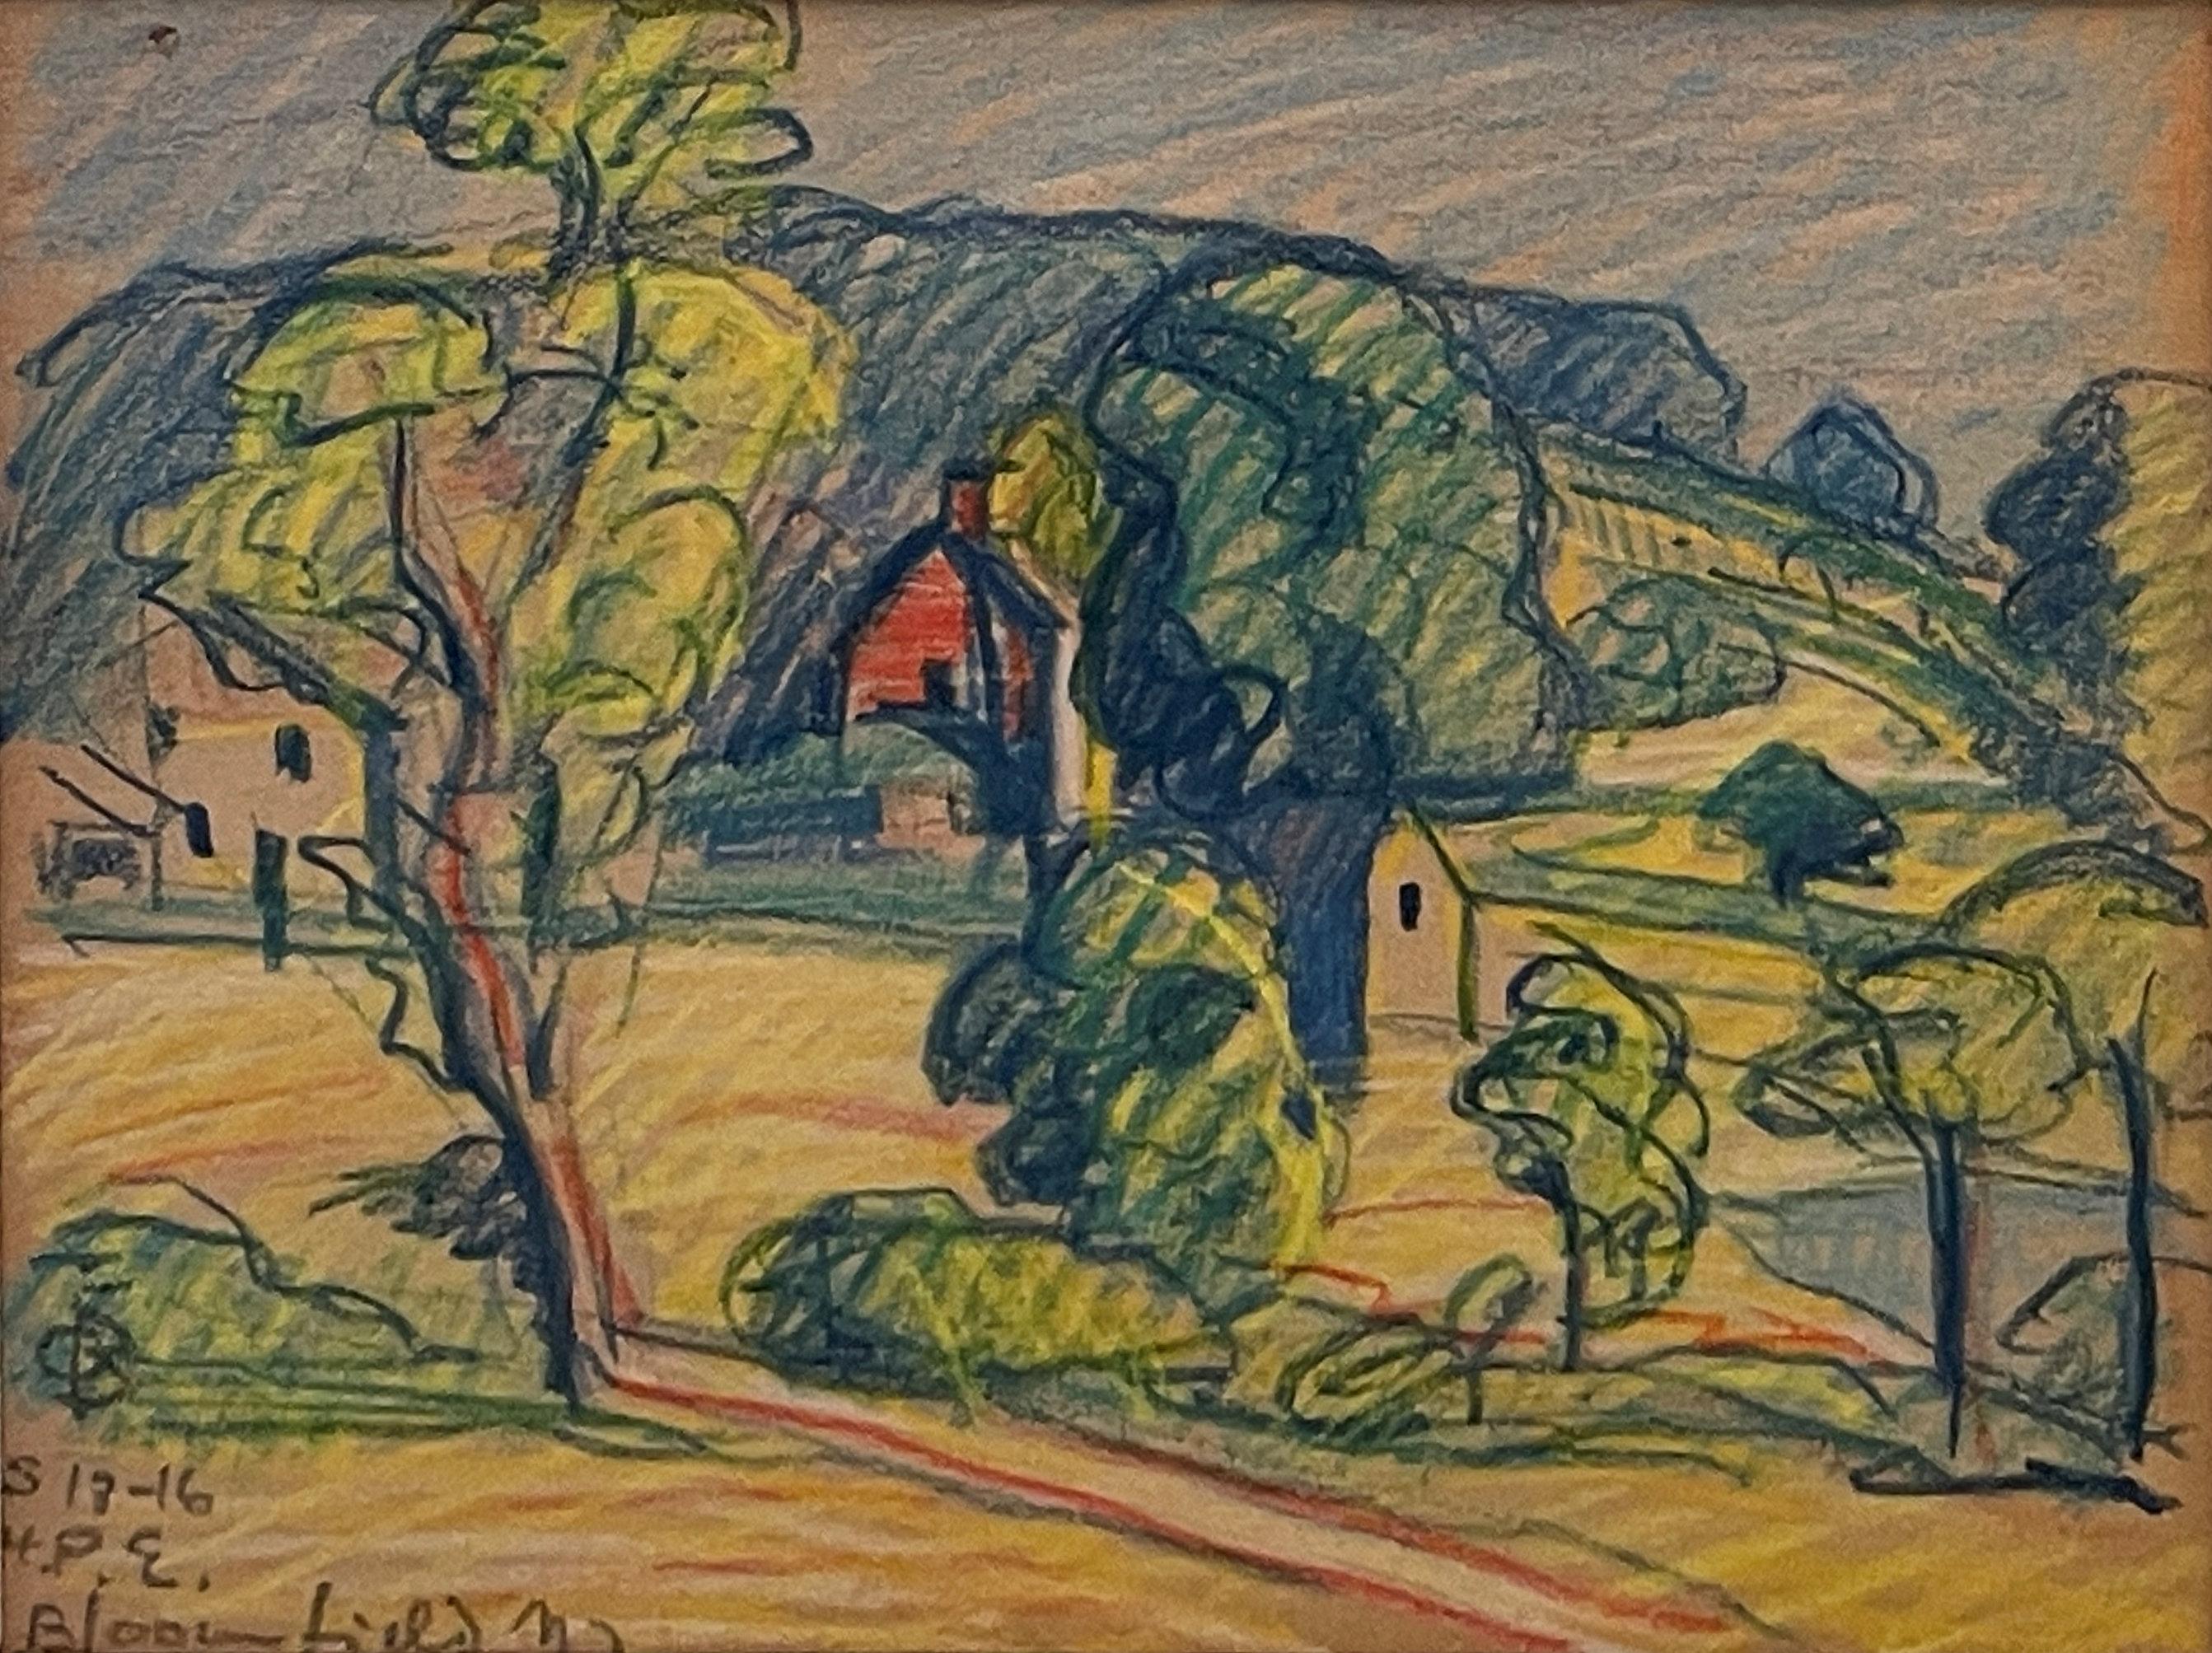 Oscar Bluemner
Bloomfield, New Jersey, September 13, 1916
Signed, titled, and dated lower left
Crayon on paper
5 x 5 3/4 inches

Provenance:
Fox Gallery, New York
Sheldon Ross Gallery, Birmingham, Michigan
Wendell Street Gallery, Cambridge,